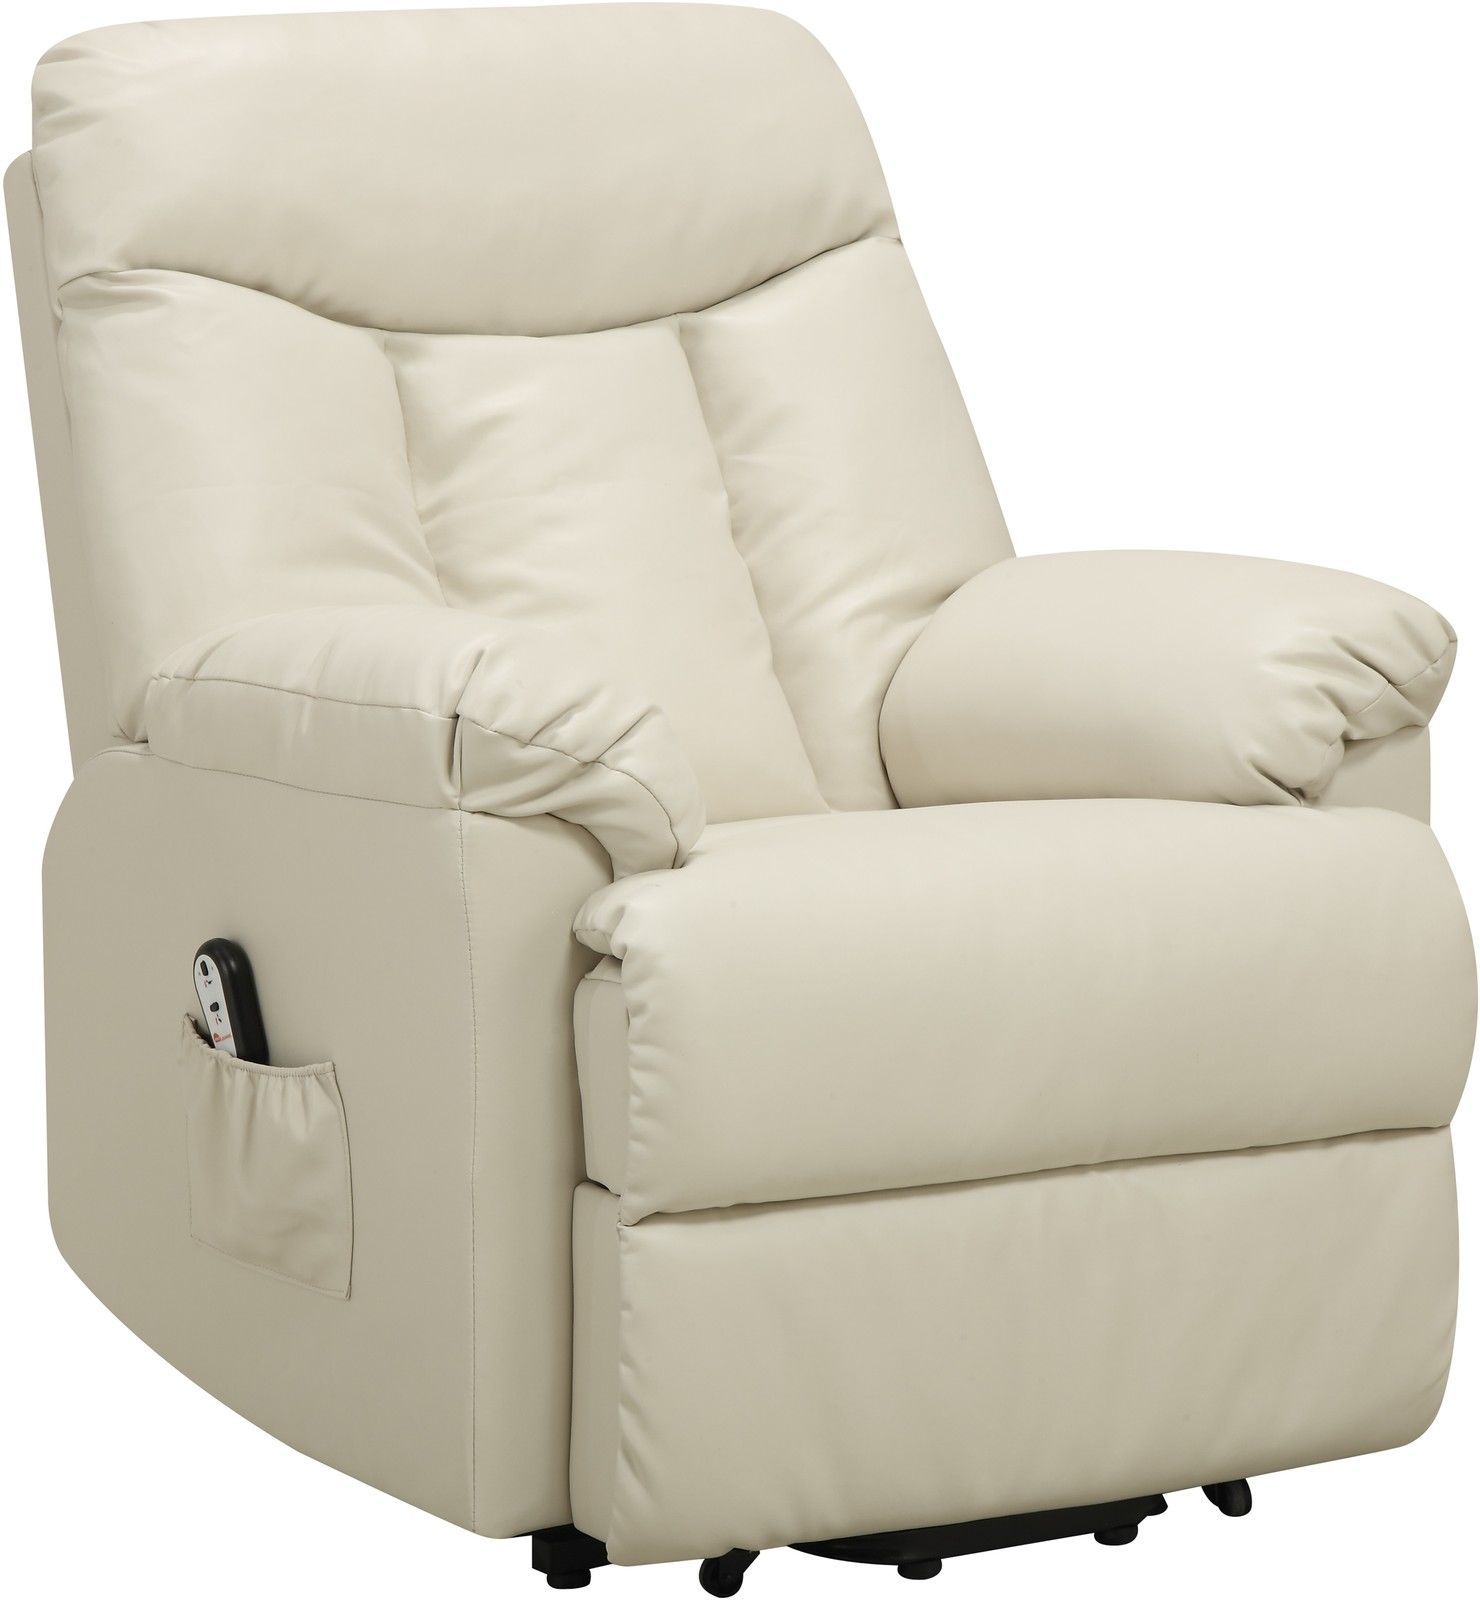 Electric Lift Chair Recliner Cream Leather Power Motion Lounge Seat ...